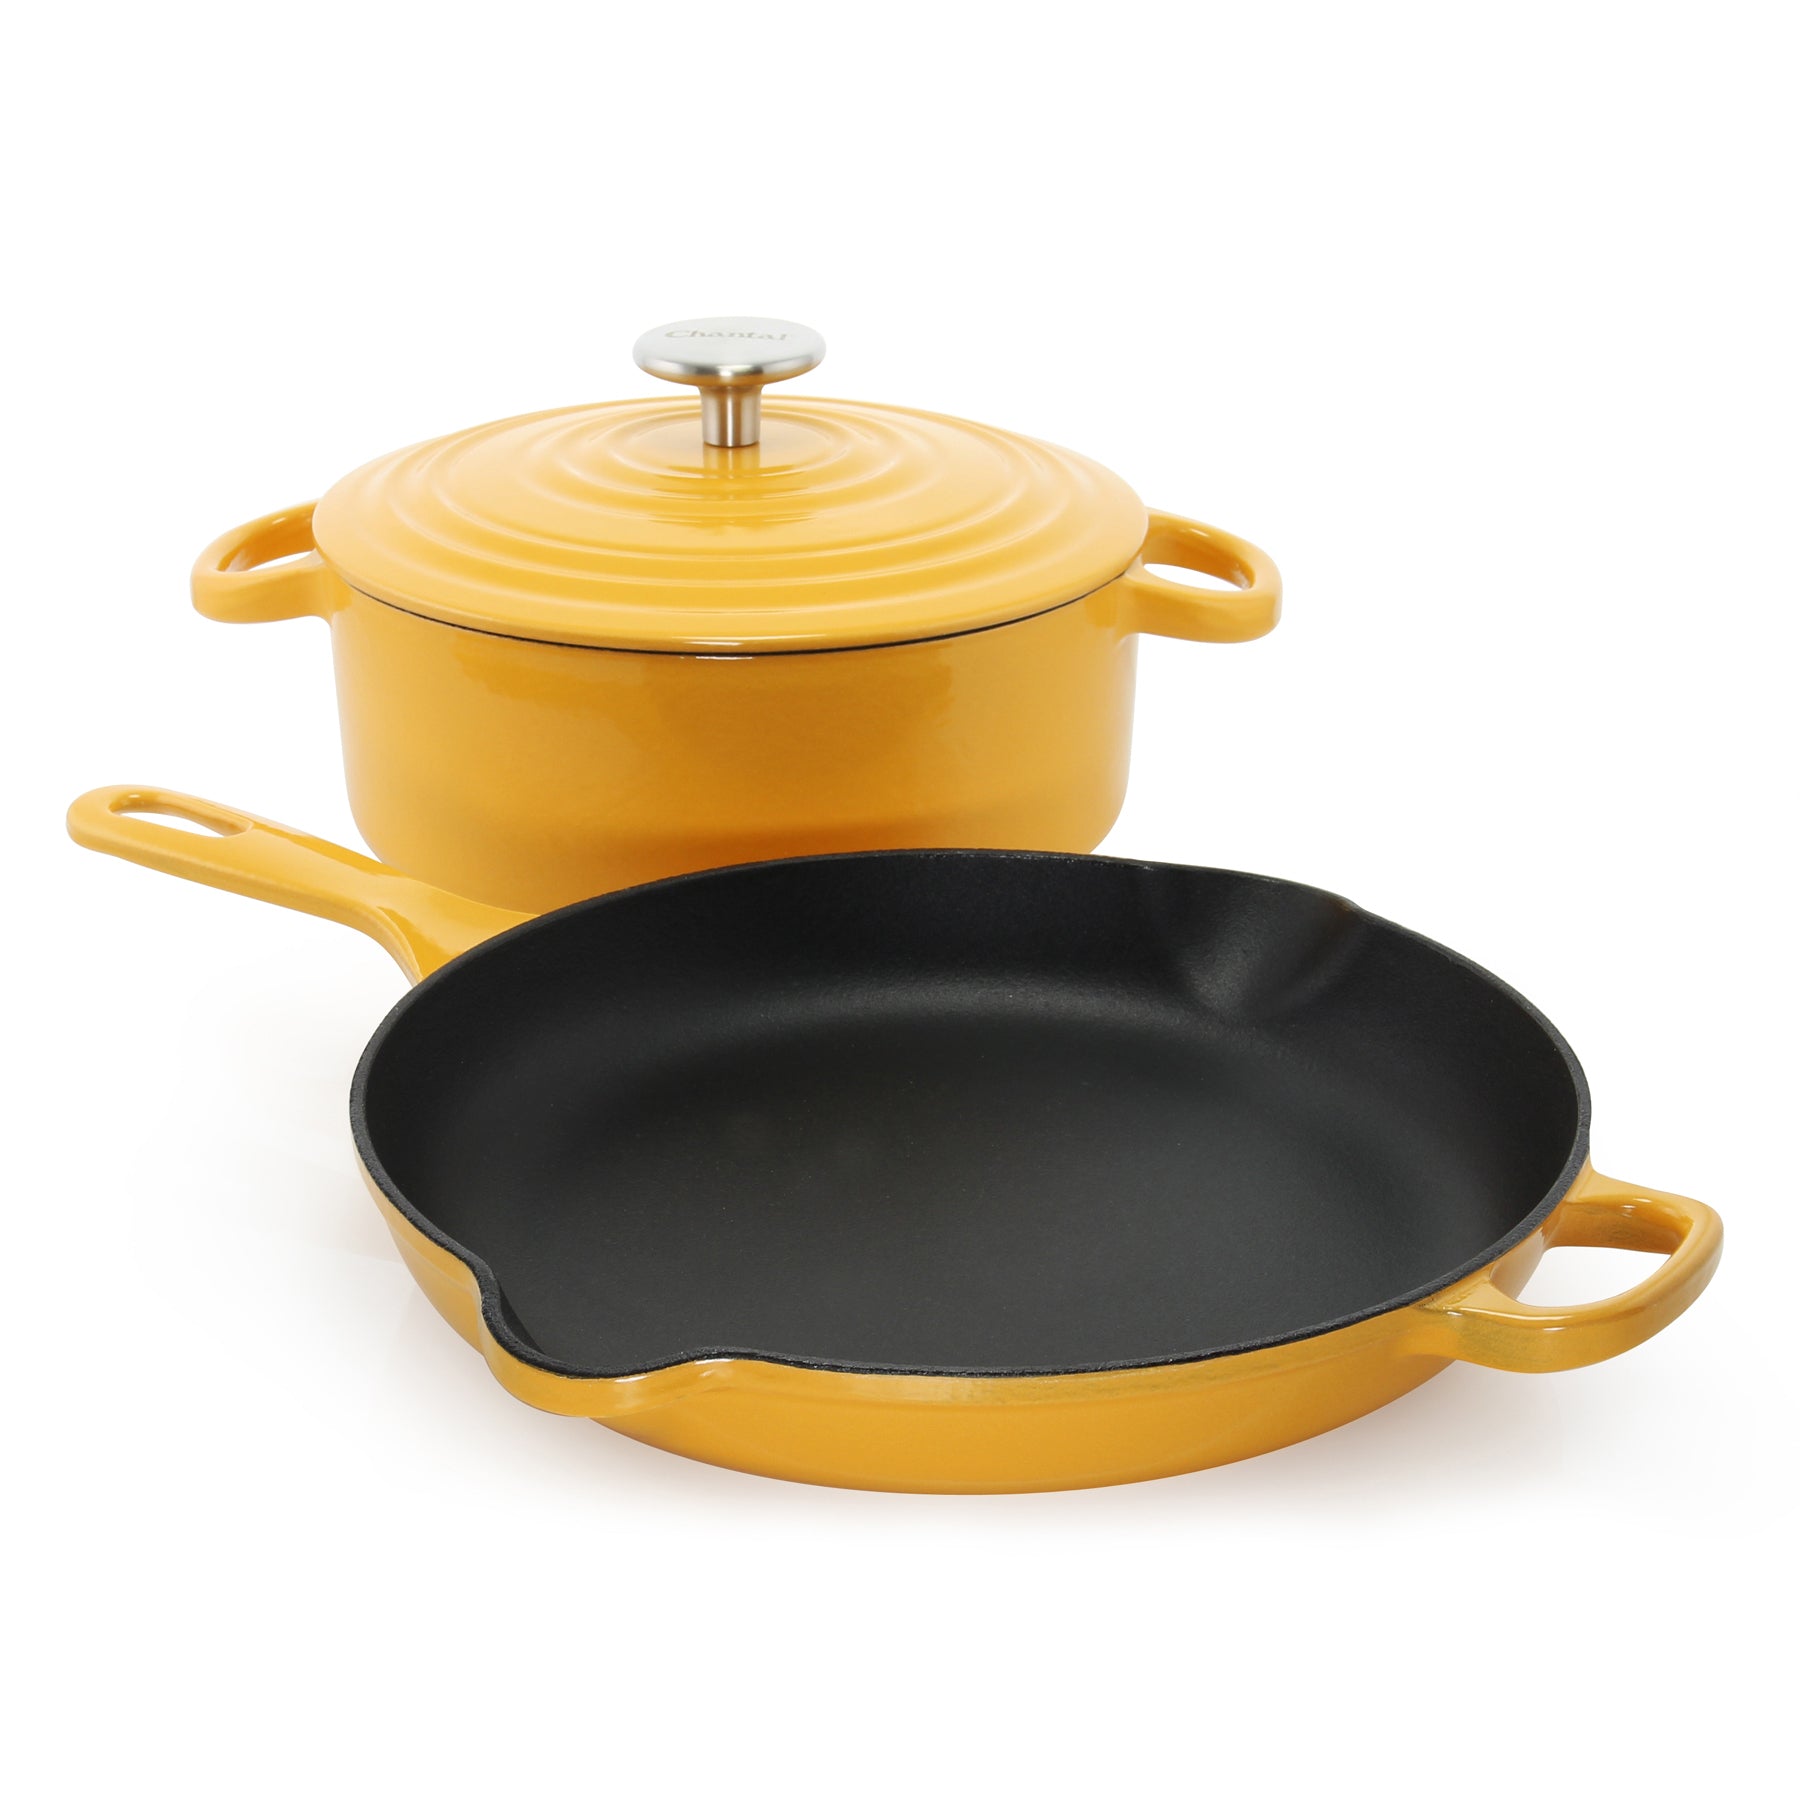 Potted Pans 3 in 1 Breakfast Pan with Sections - 11in Nonstick 3